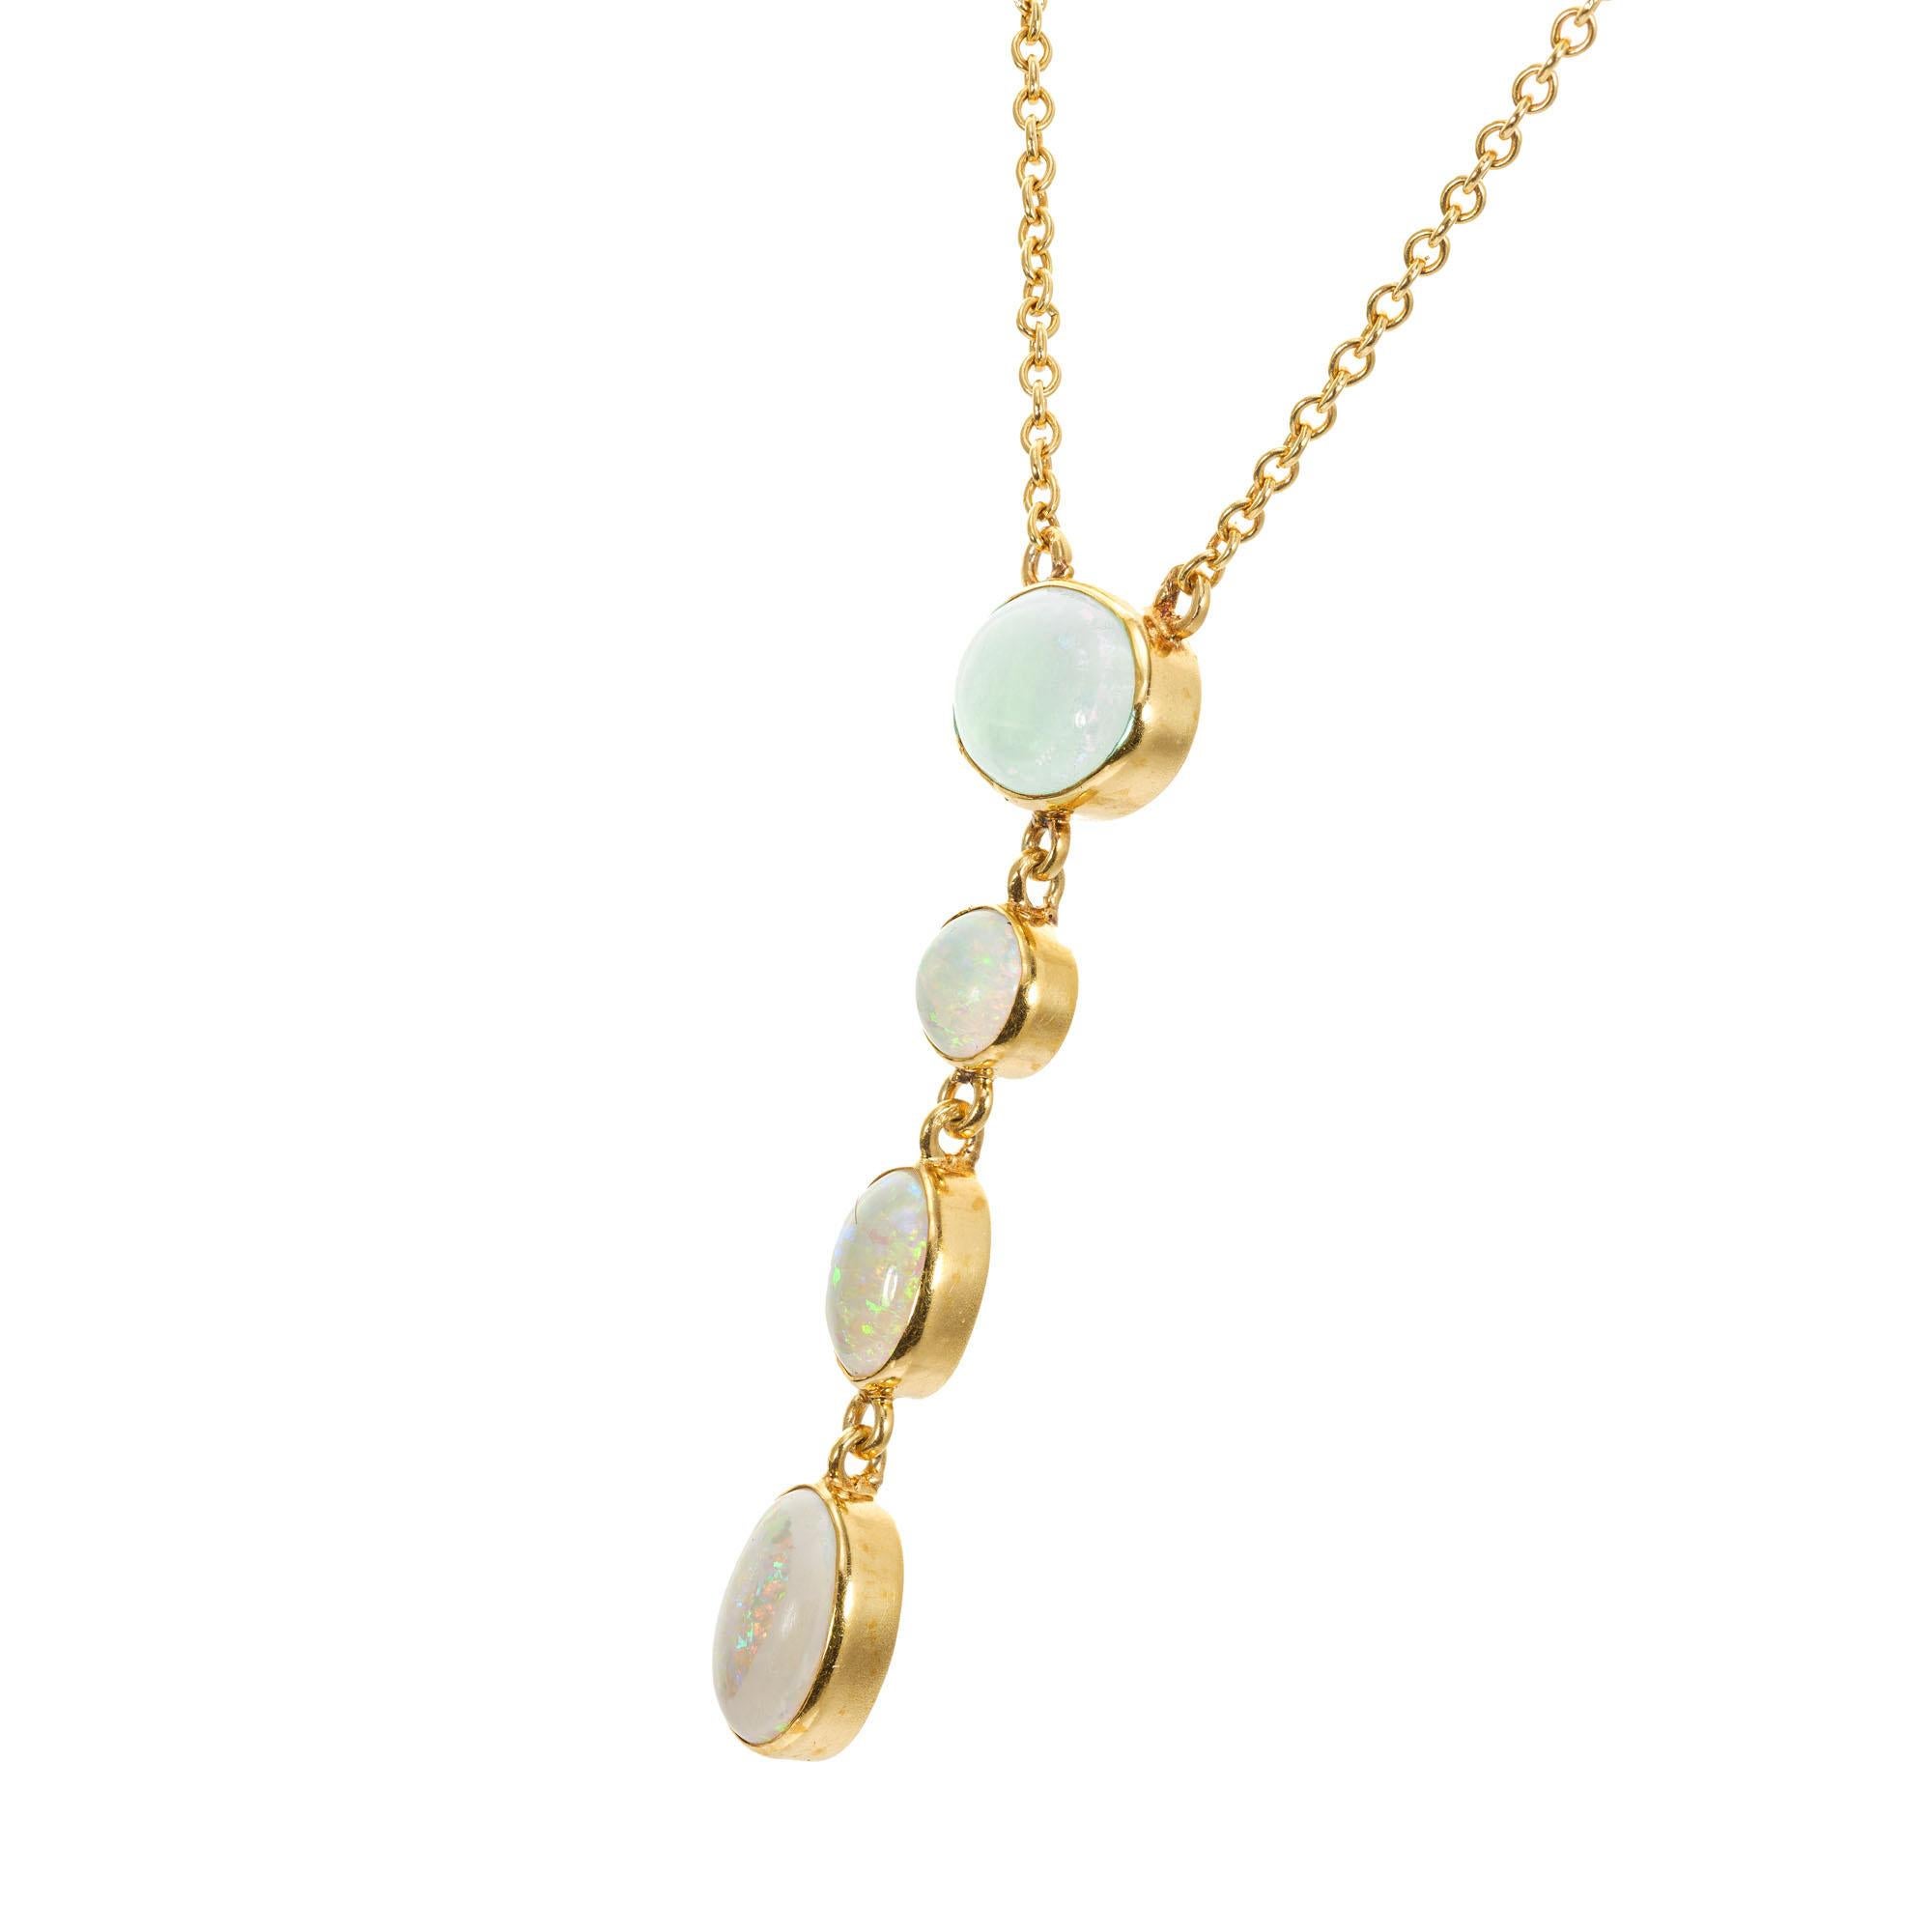 Australian opal necklace pendant. 4 natural round a and oval untreated blue green opals in a handmade dangle bezel set drop pendant in 14k yellow gold. 19 inches in length.  Circa 1940's.

3 oval bluish green opals, approx. 1.35cts
1 round bluish